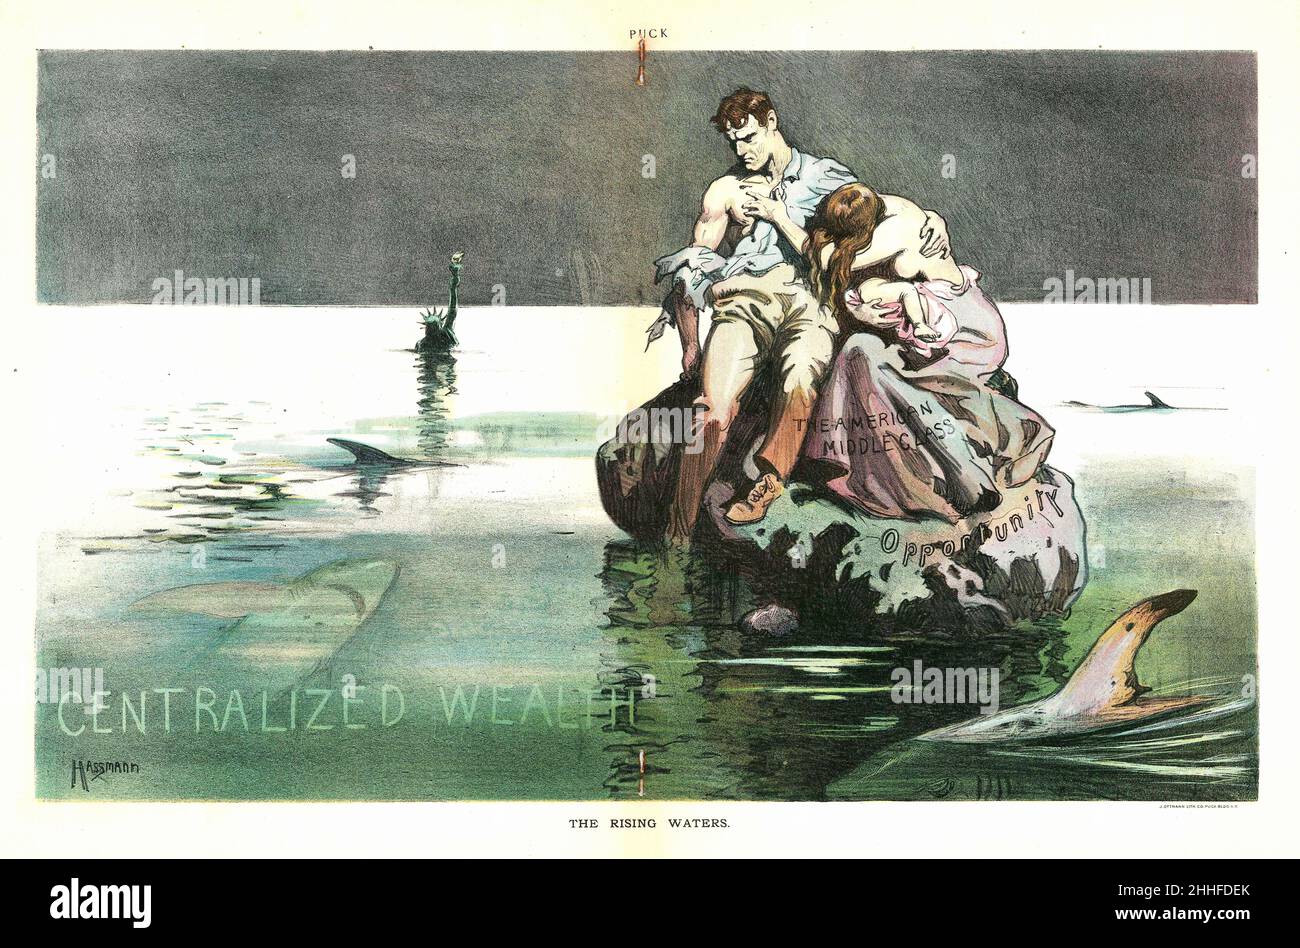 Carl Hassmann-The Rising Waters-Centralized Wealth-The American middle class stranded on a rock whilst sharks circle. The Statue of Liberty is drowning. Stock Photo